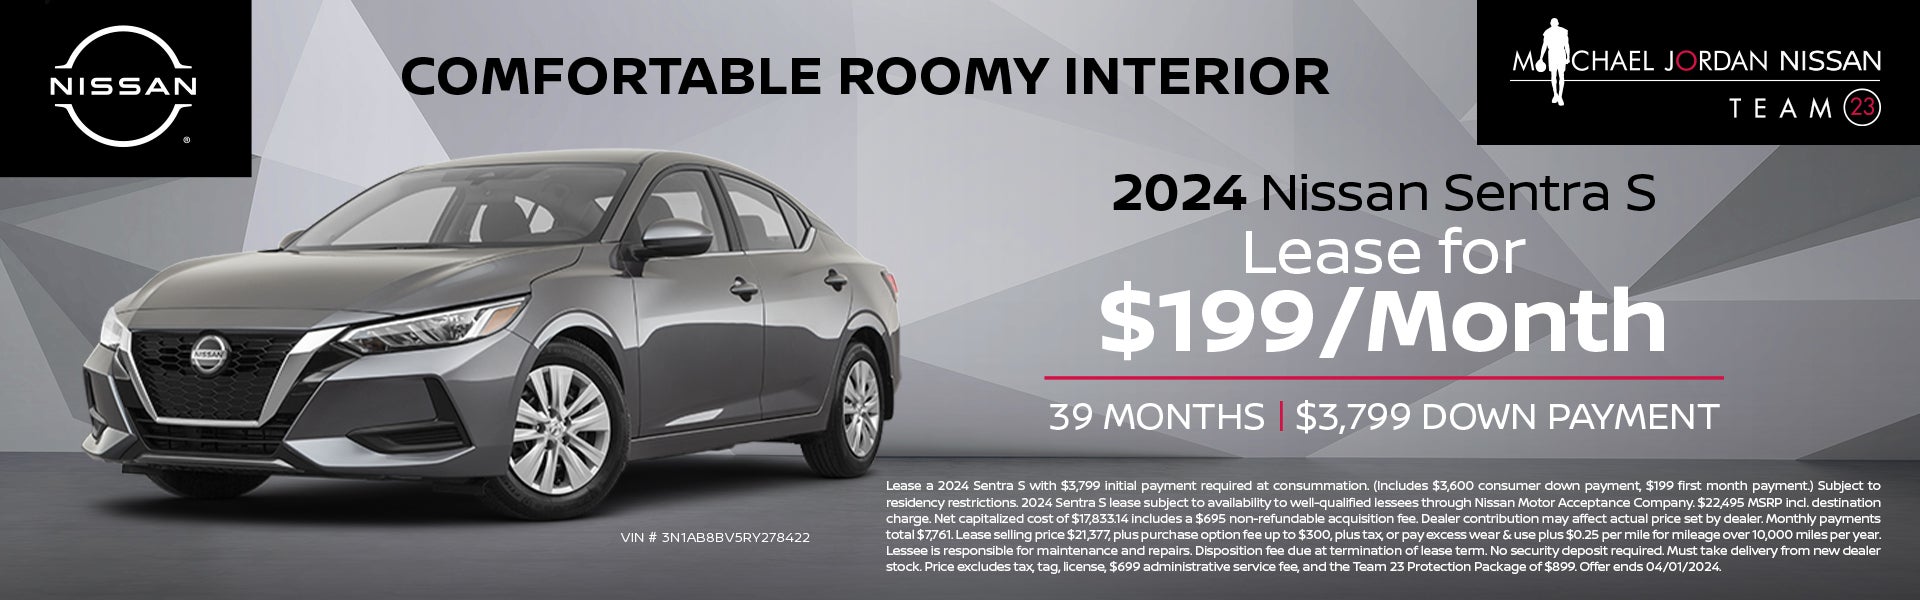 2024 Nissan Sentra Lease For $199/Mo For 36 Mos